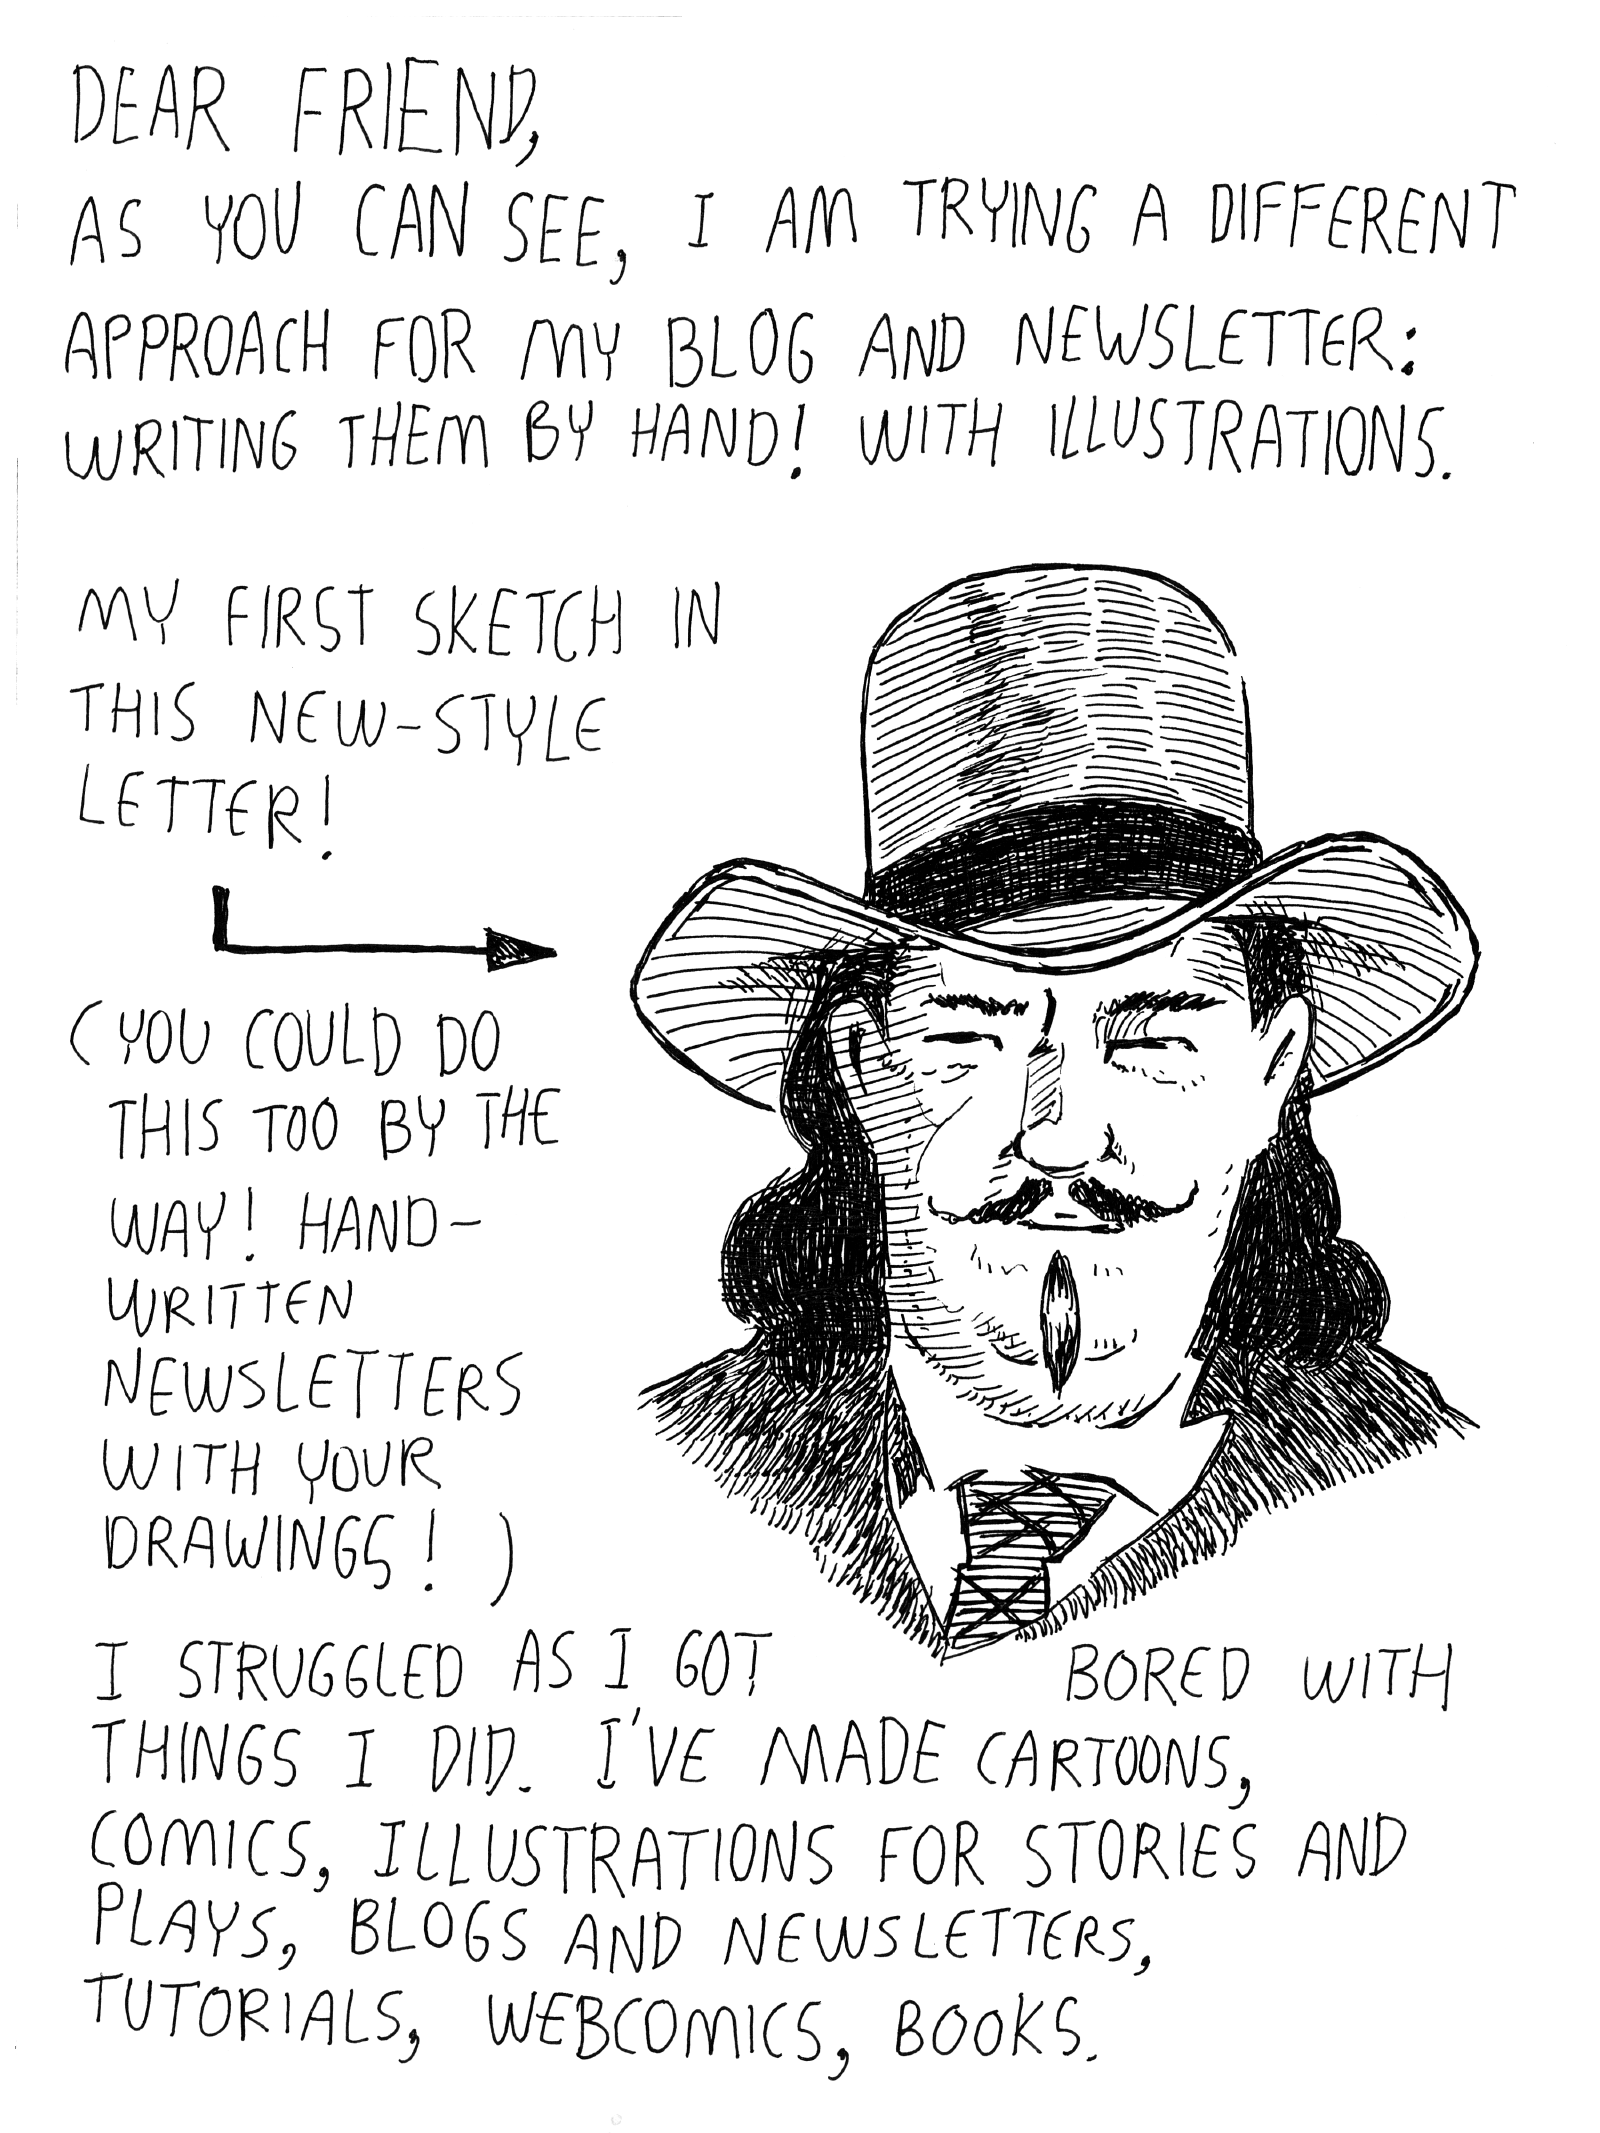 As you can see, I am trying a different approach for my blog and newsletter: writing them by hand! With illustrations. I struggled as I got bored with things I did. I have made cartoons, comics, illustrations for stories and plays, blogs and newsletters, tutorials, webcomics, books.